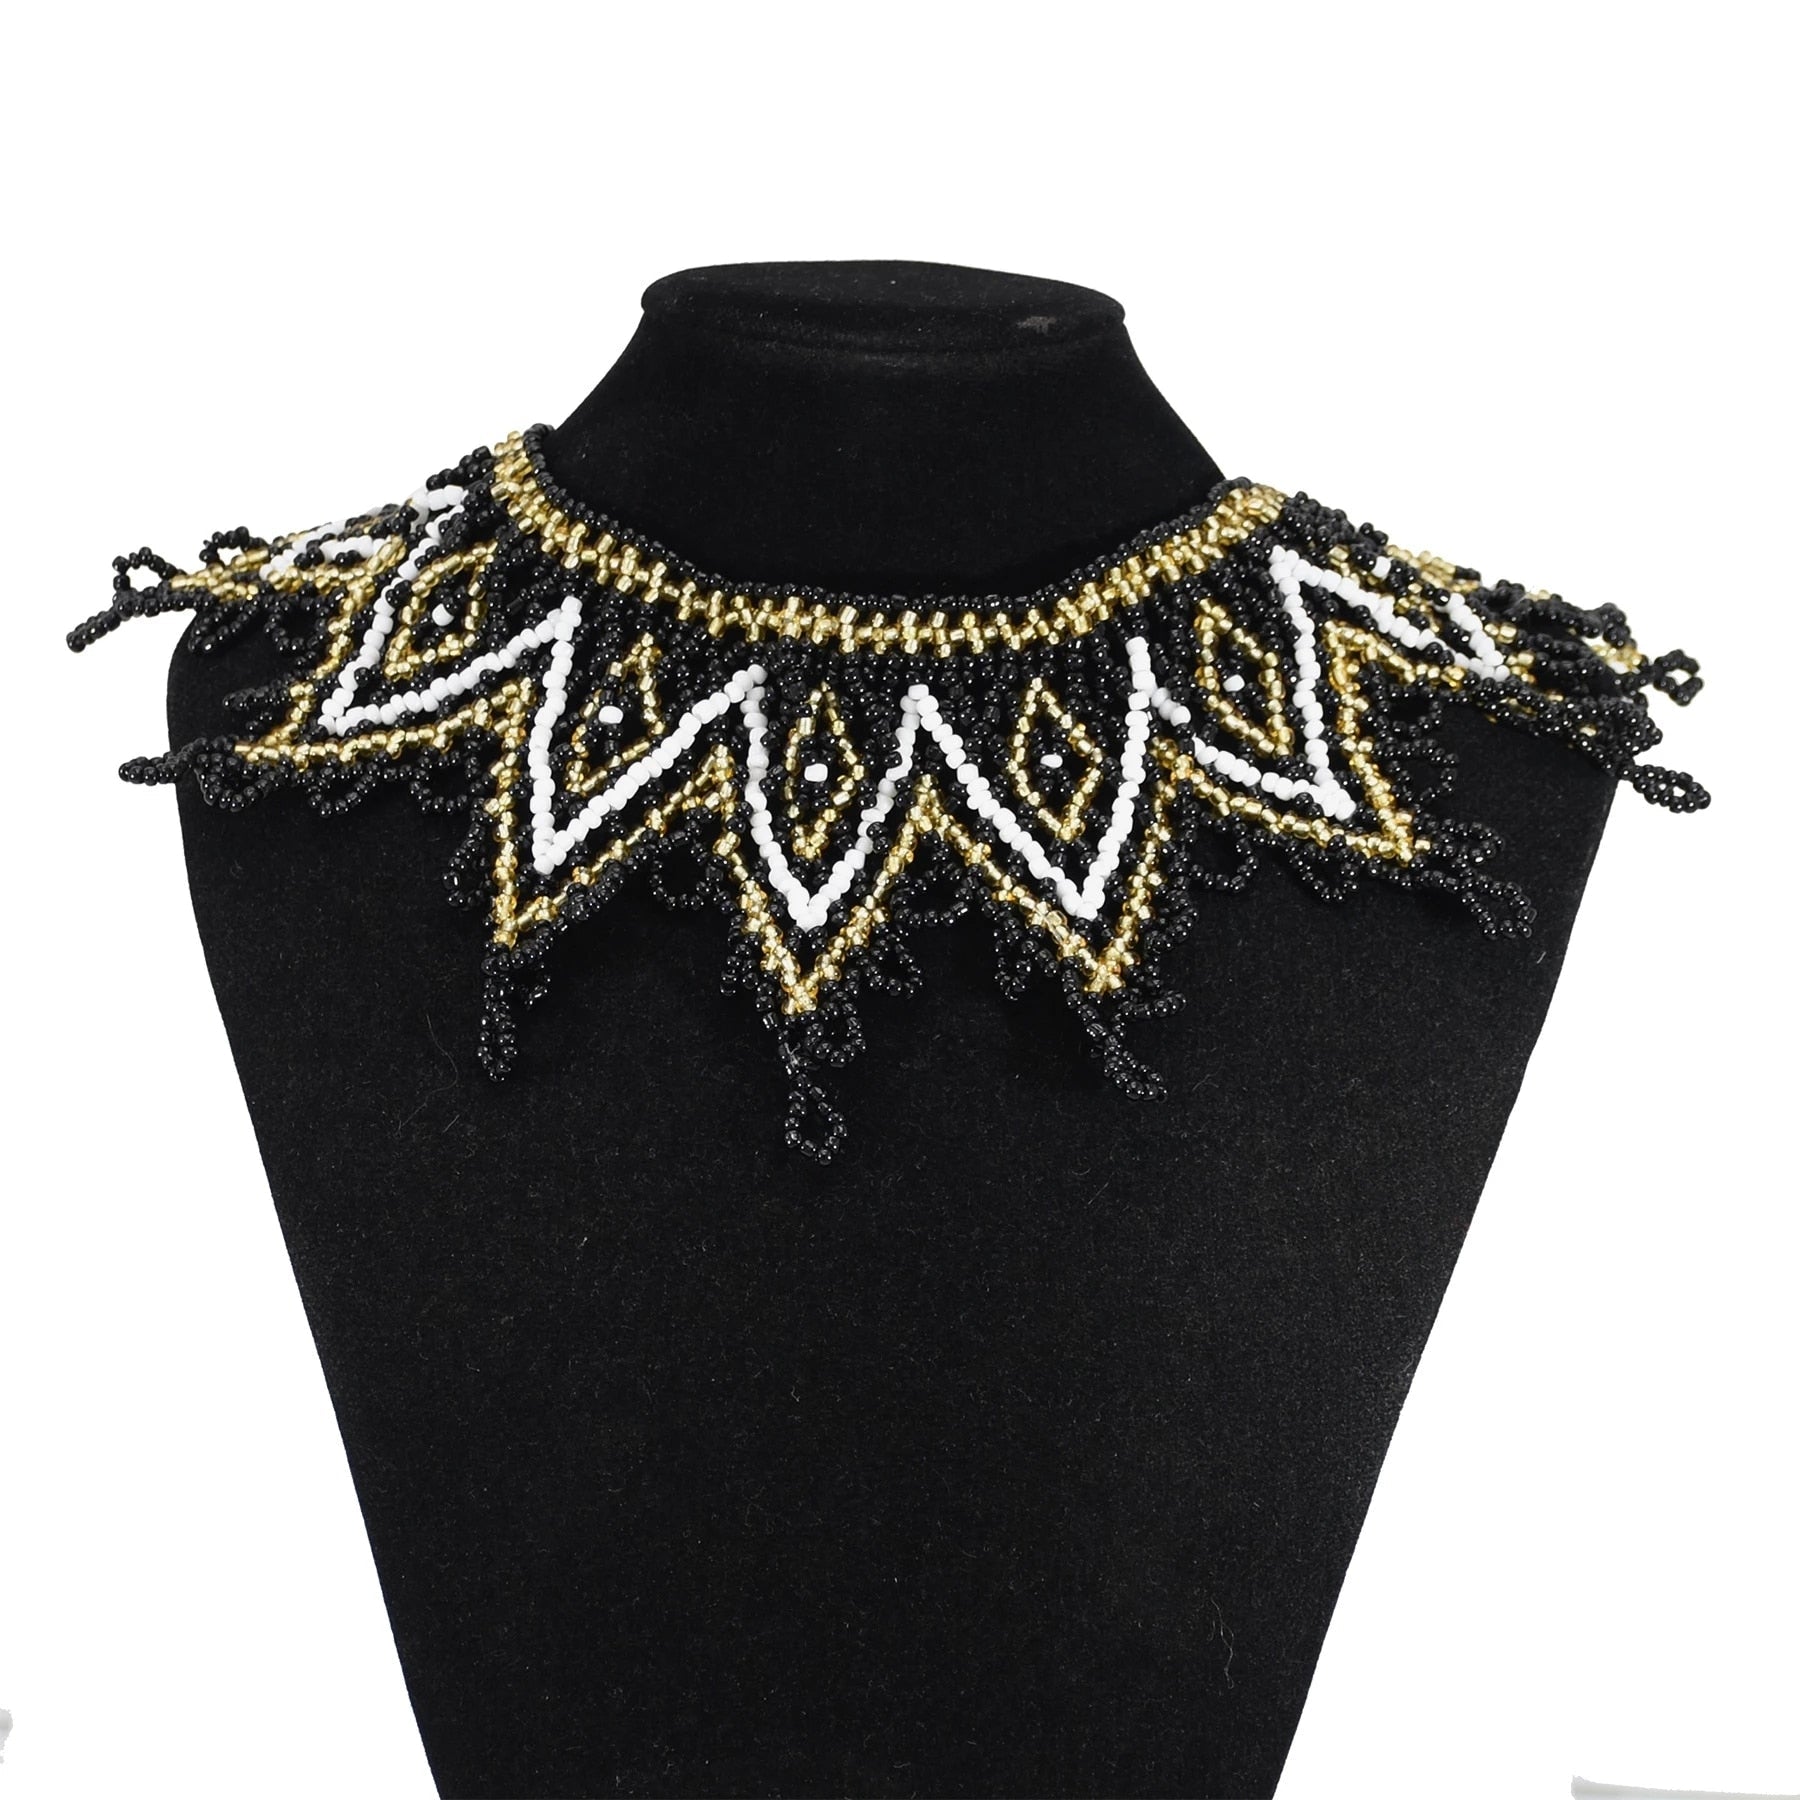 Ethnic African Big Chunky Bib Statement Choker - A Vibrant and Multicolored Beaded Necklace Perfect for Women - Flexi Africa - Flexi Africa offers Free Delivery Worldwide - Vibrant African traditional clothing showcasing bold prints and intricate designs